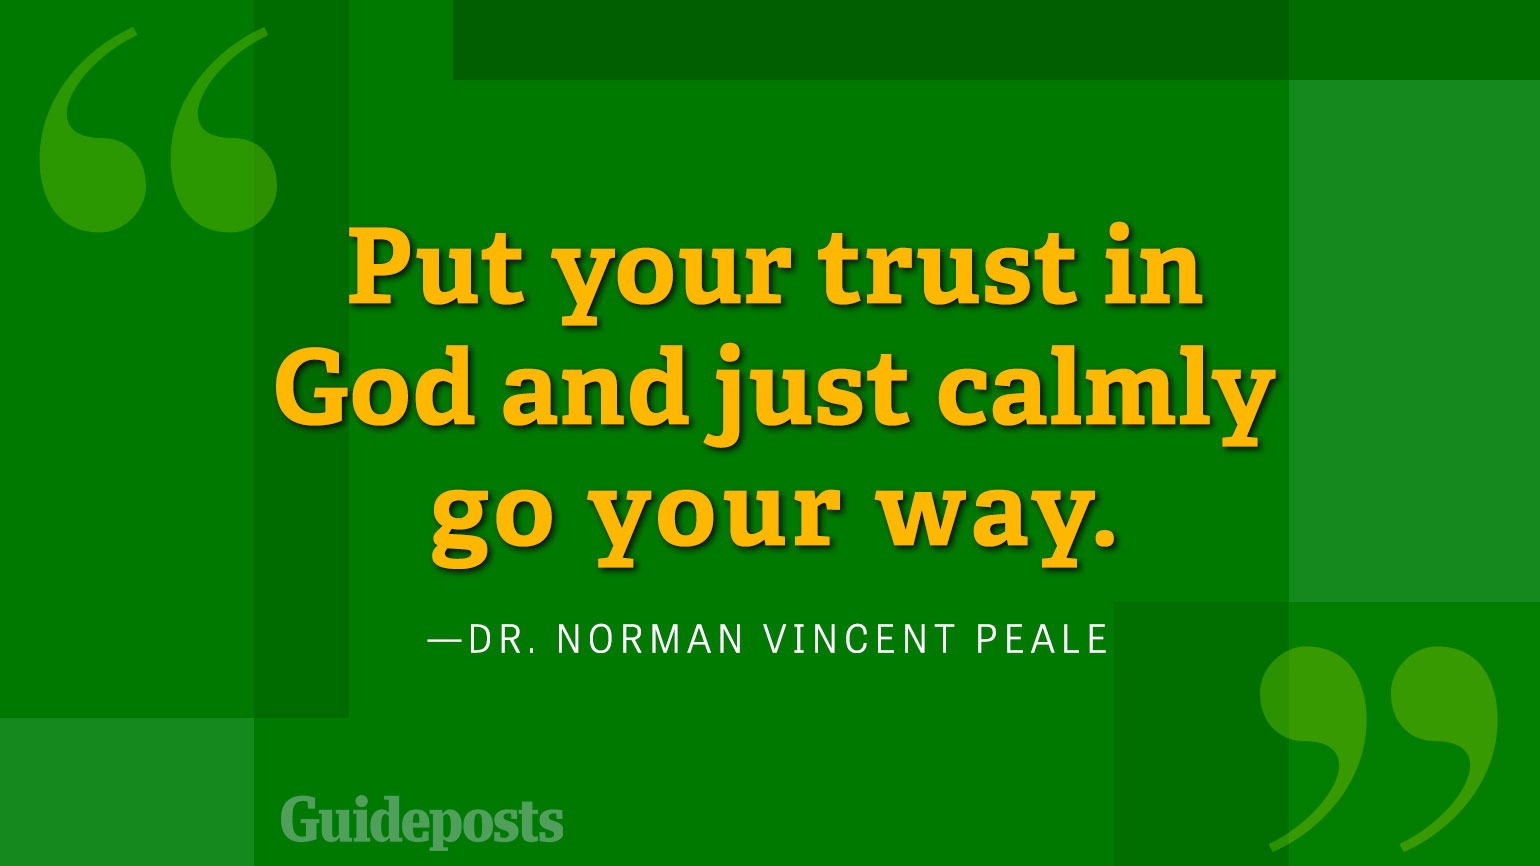 Put your trust in God and just calmly go your way.